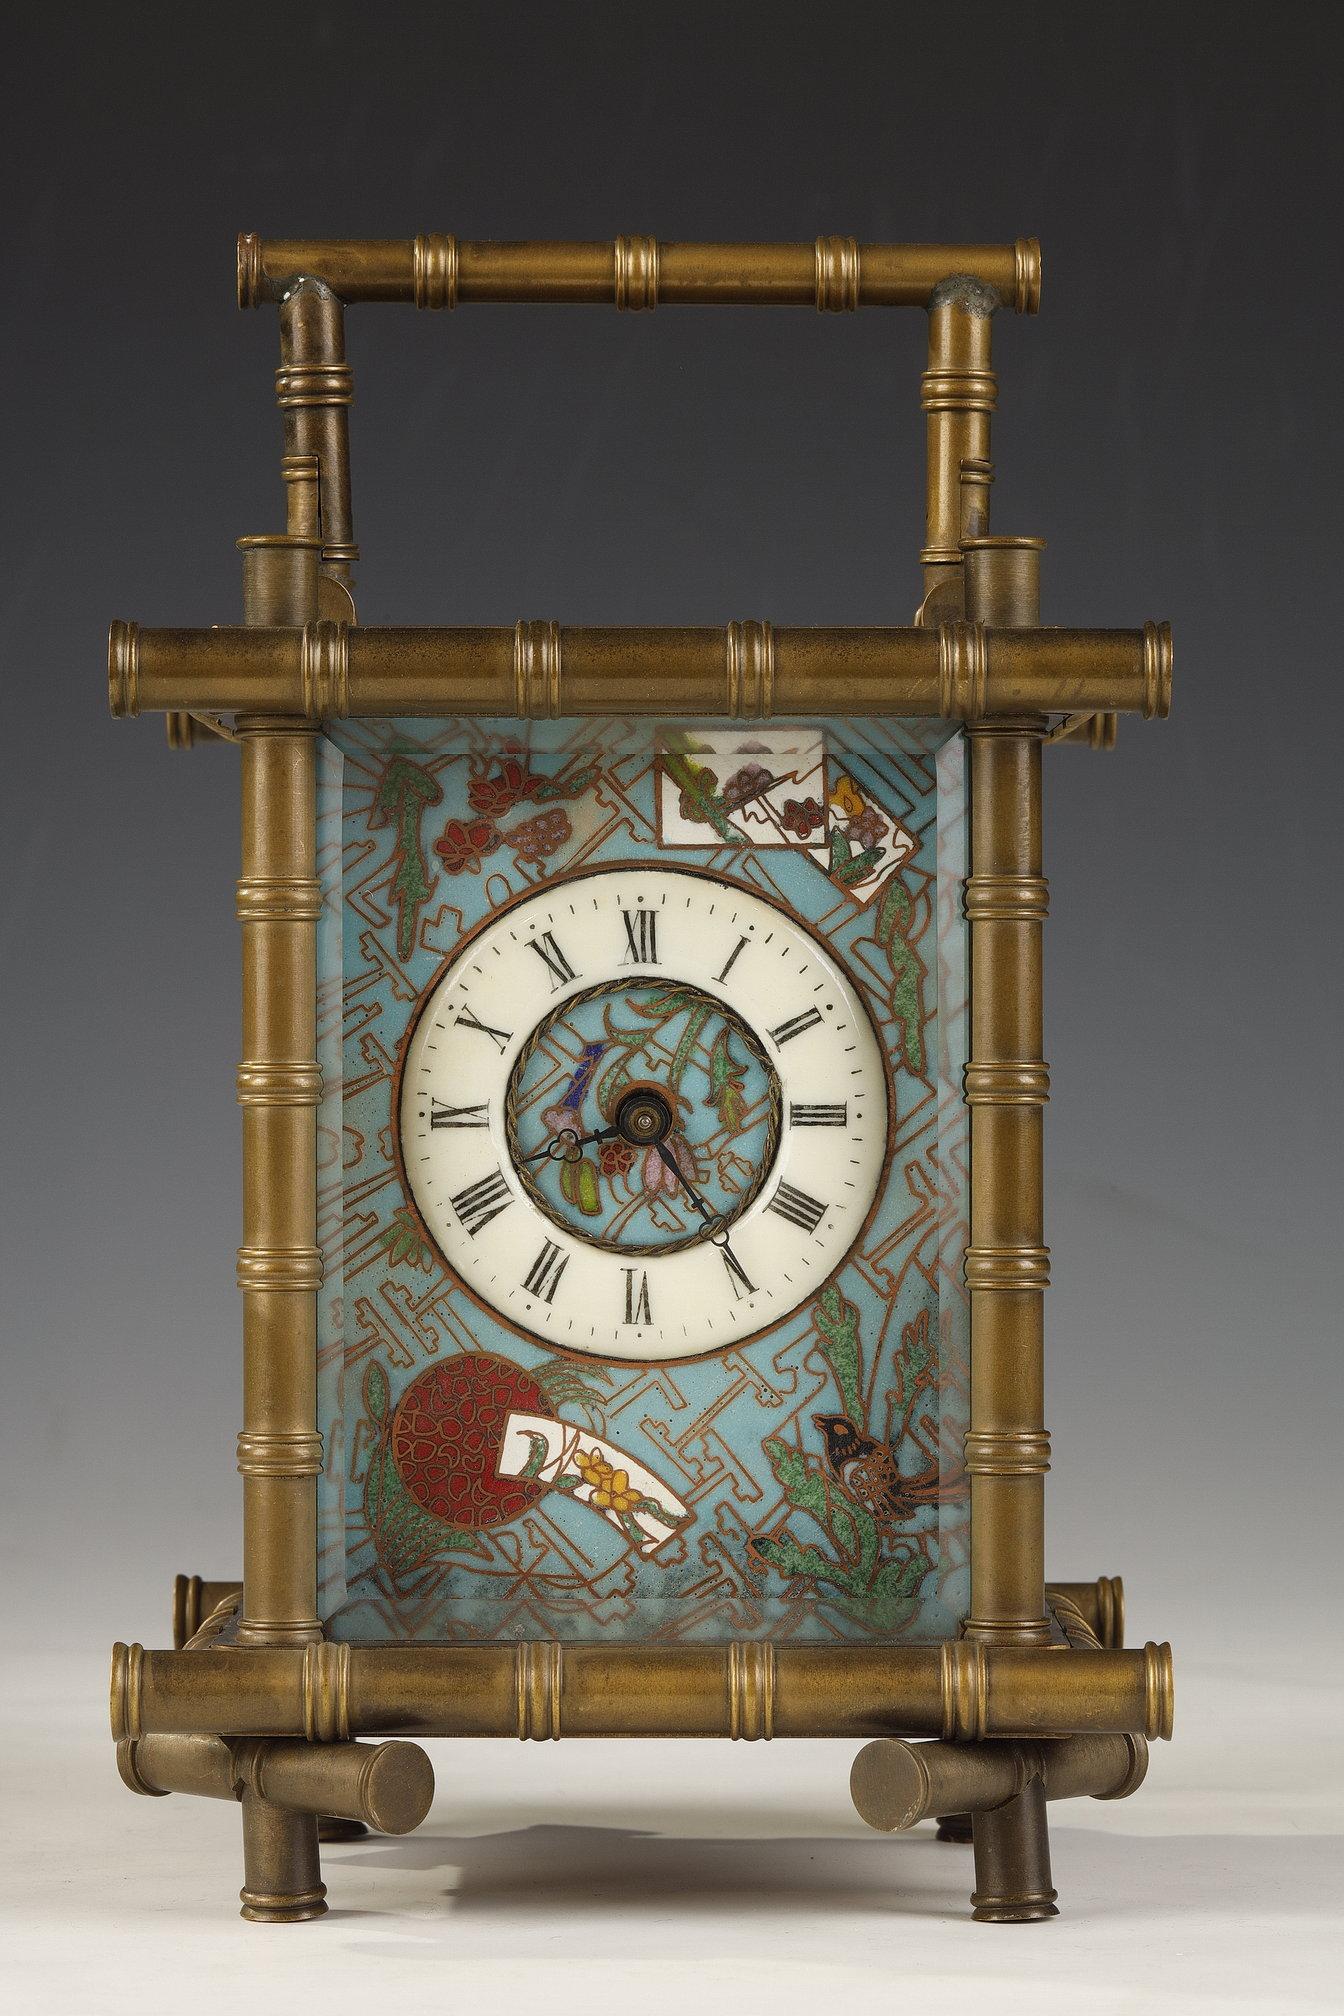 Fine aesthetic movement clock in cloisonné enamel and gilded bronze, decorated with polychromed birds and flowers, and geometric gilded ornaments on a blue ground. The dial is covered by a beveled glass and the gilded bronze sides of the clock